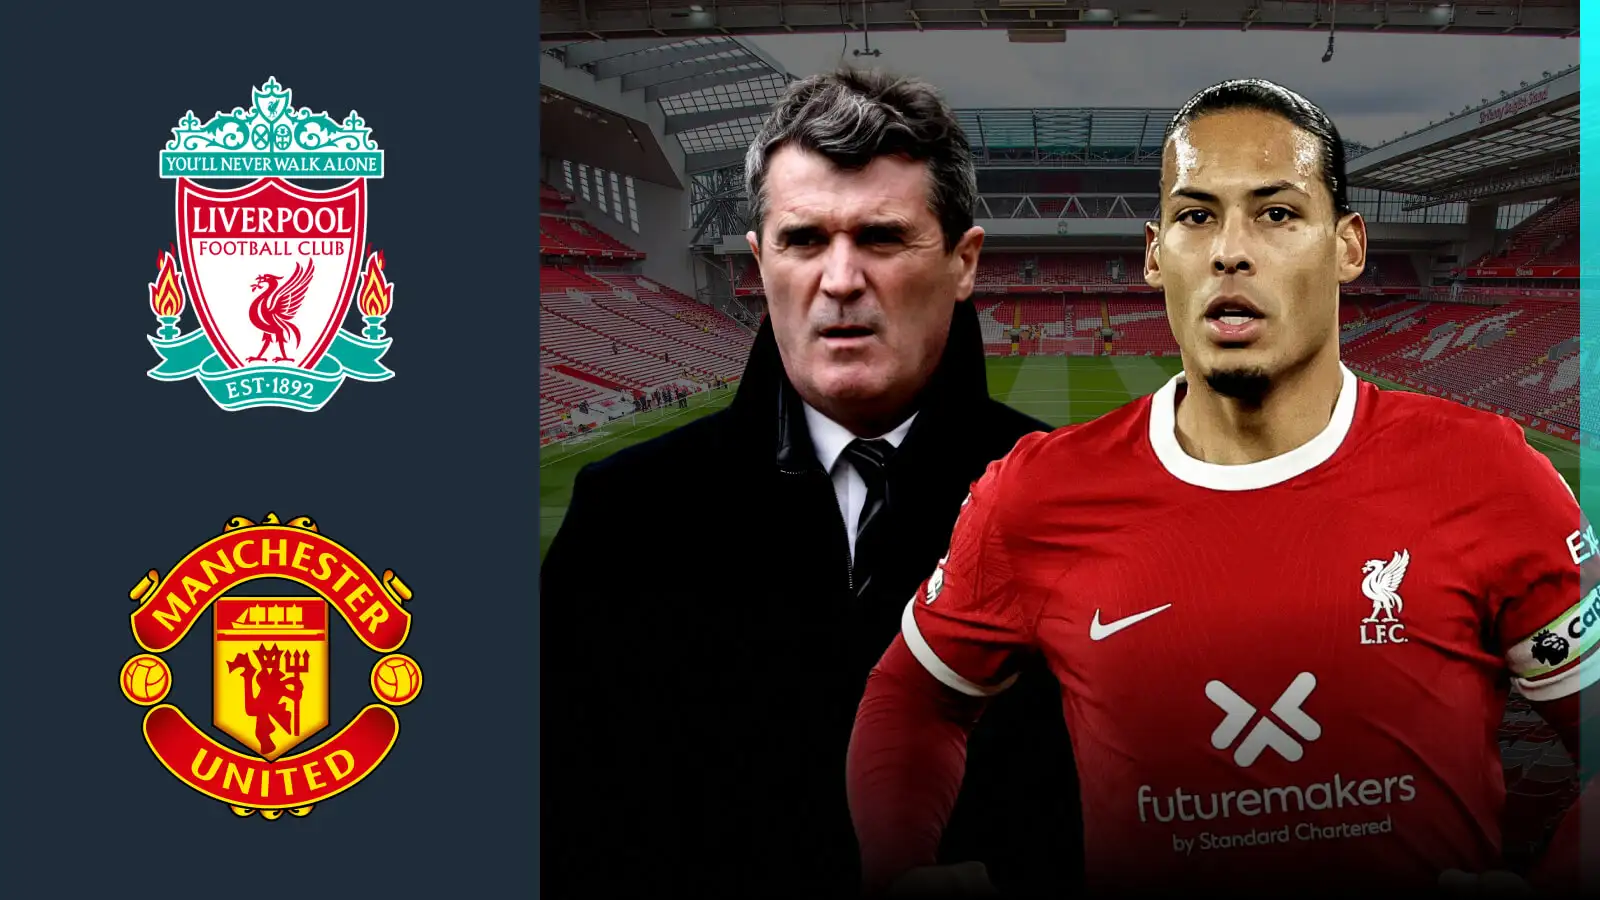 Virgil van Dijk and also Roy Keane using Liverpool and also Manchester Joined badges